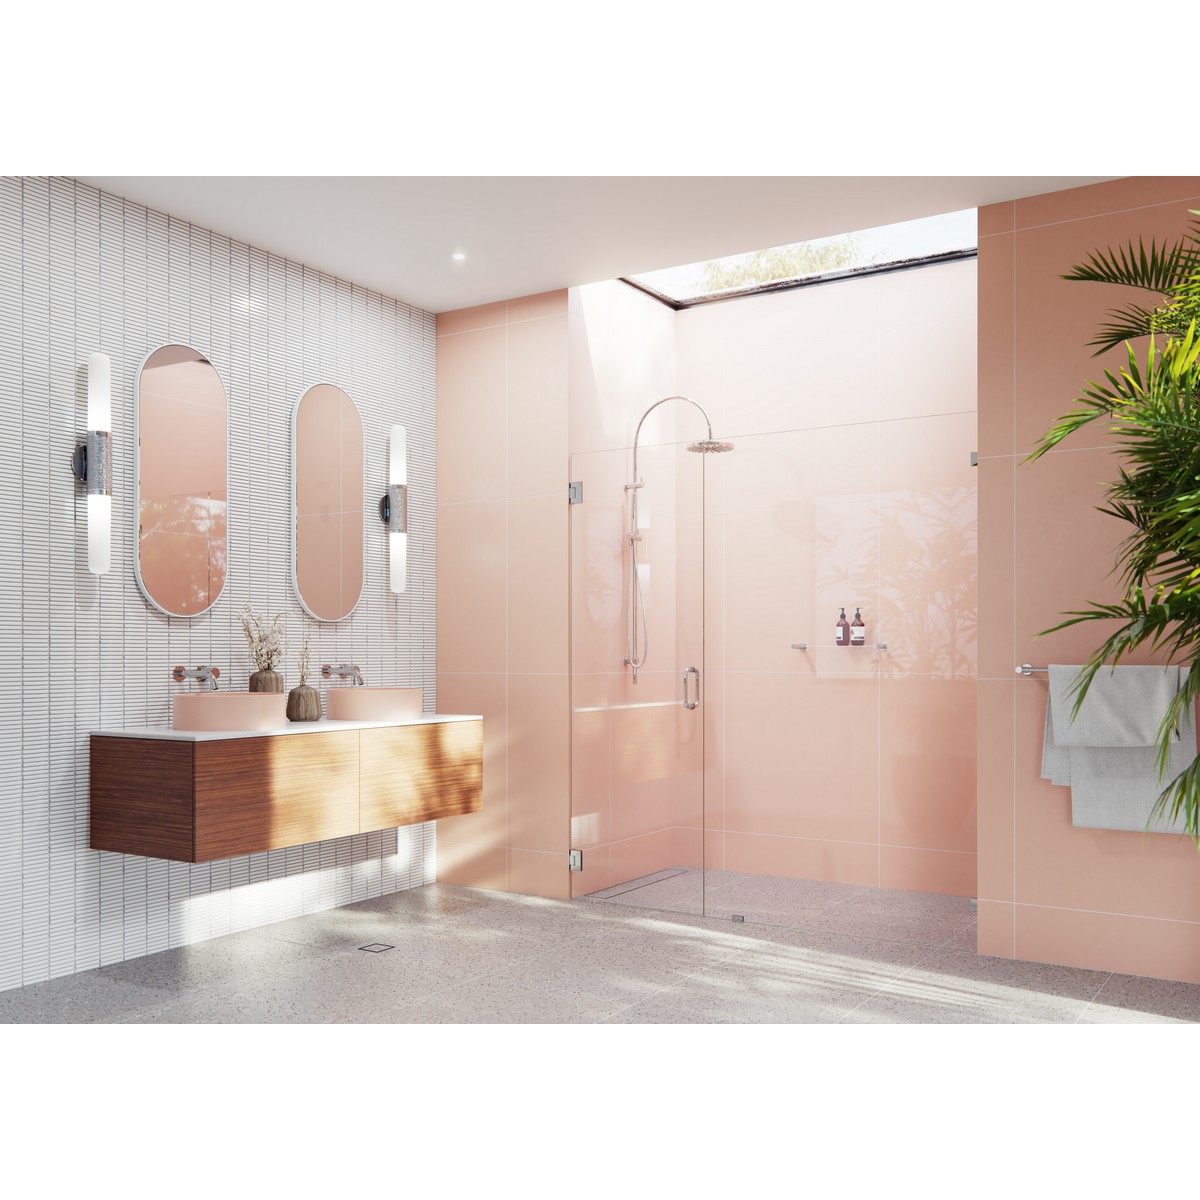 GLASS WAREHOUSE GW-WH-69.5 ILLUME 69 1/2 W X 78 H WALL HINGED FULLY FRAMELESS GLASS SHOWER ENCLOSURE